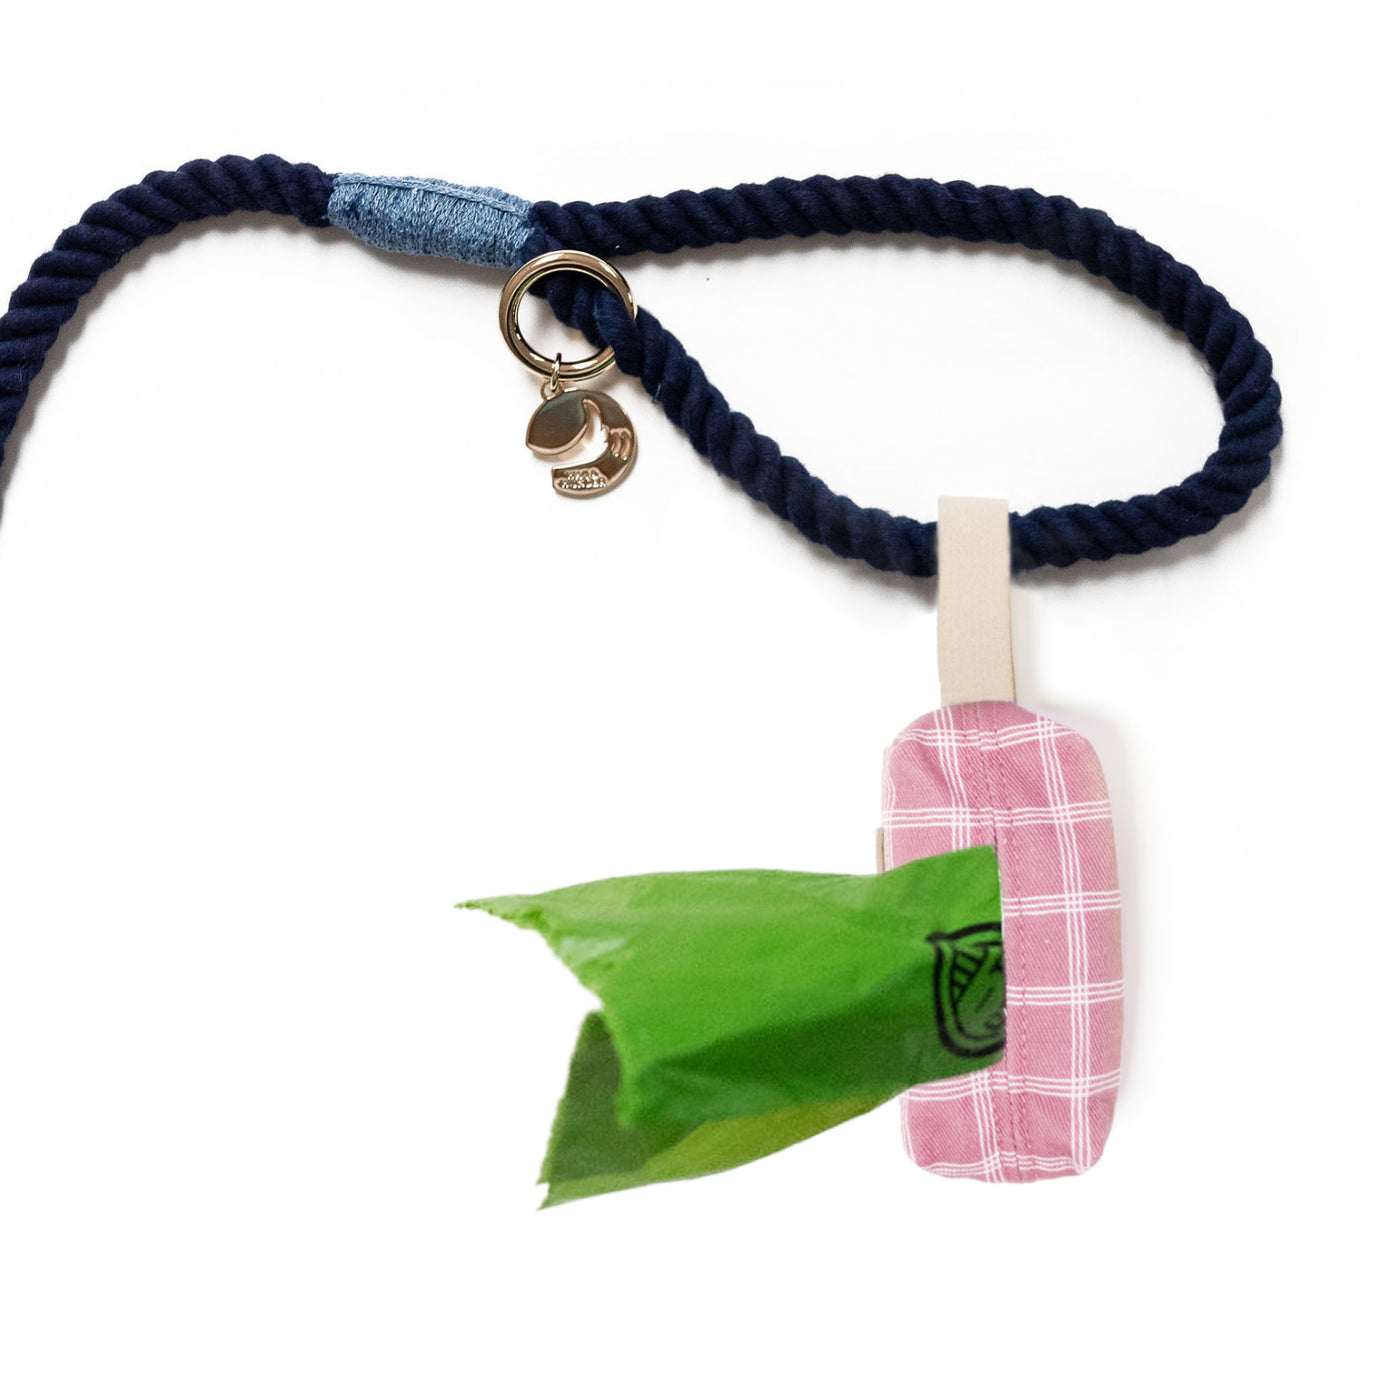 Bottom view of pink plaid dog poop bag holder attached to leash handle